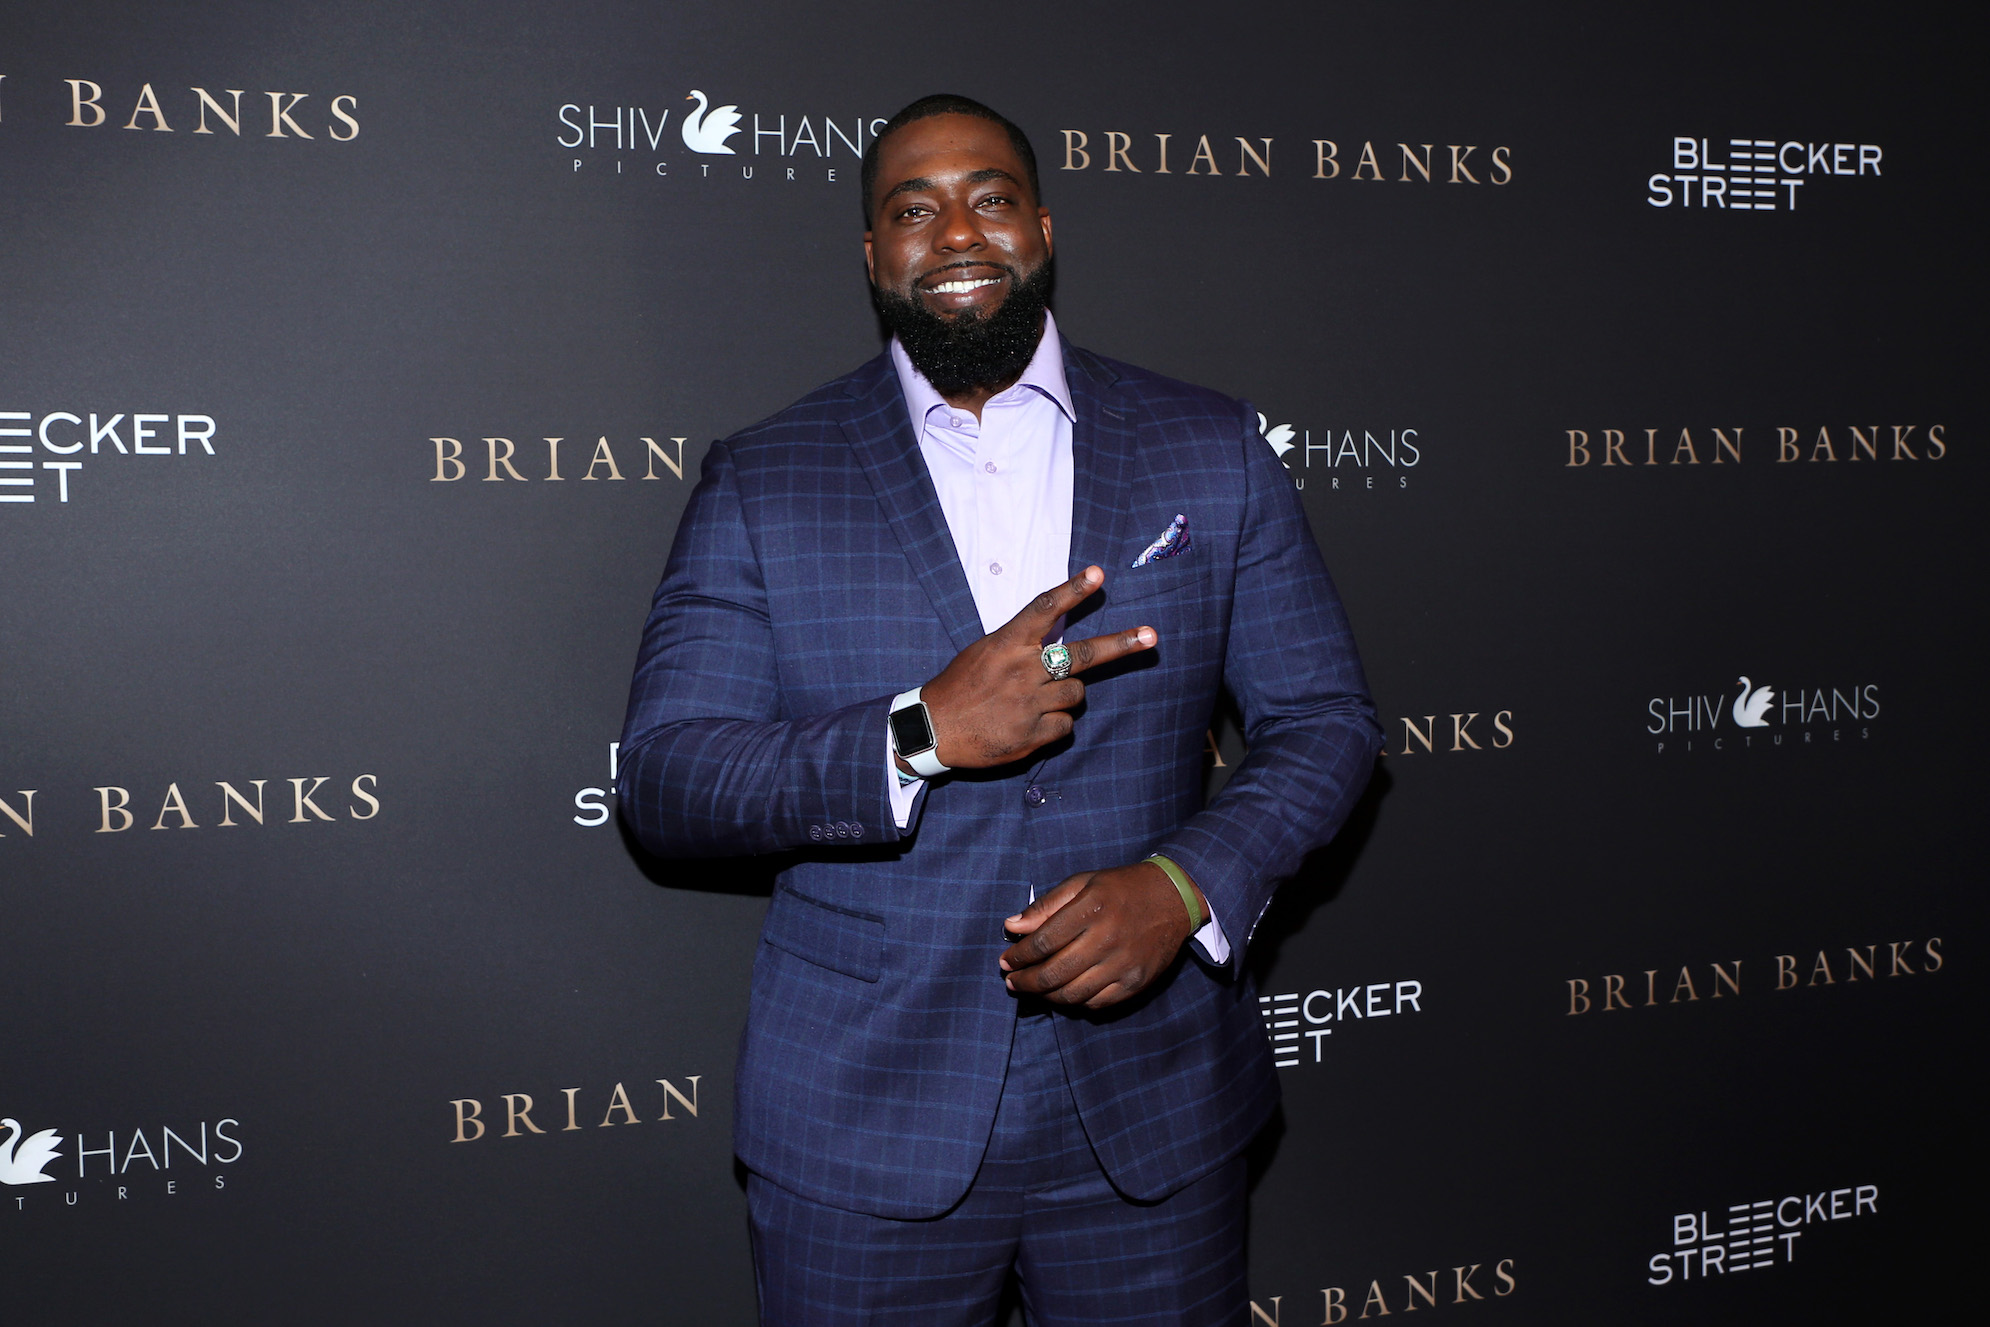 Brian Banks was a high school football star in California, but his college and NFL dreams were shattered by a wrongful conviction.